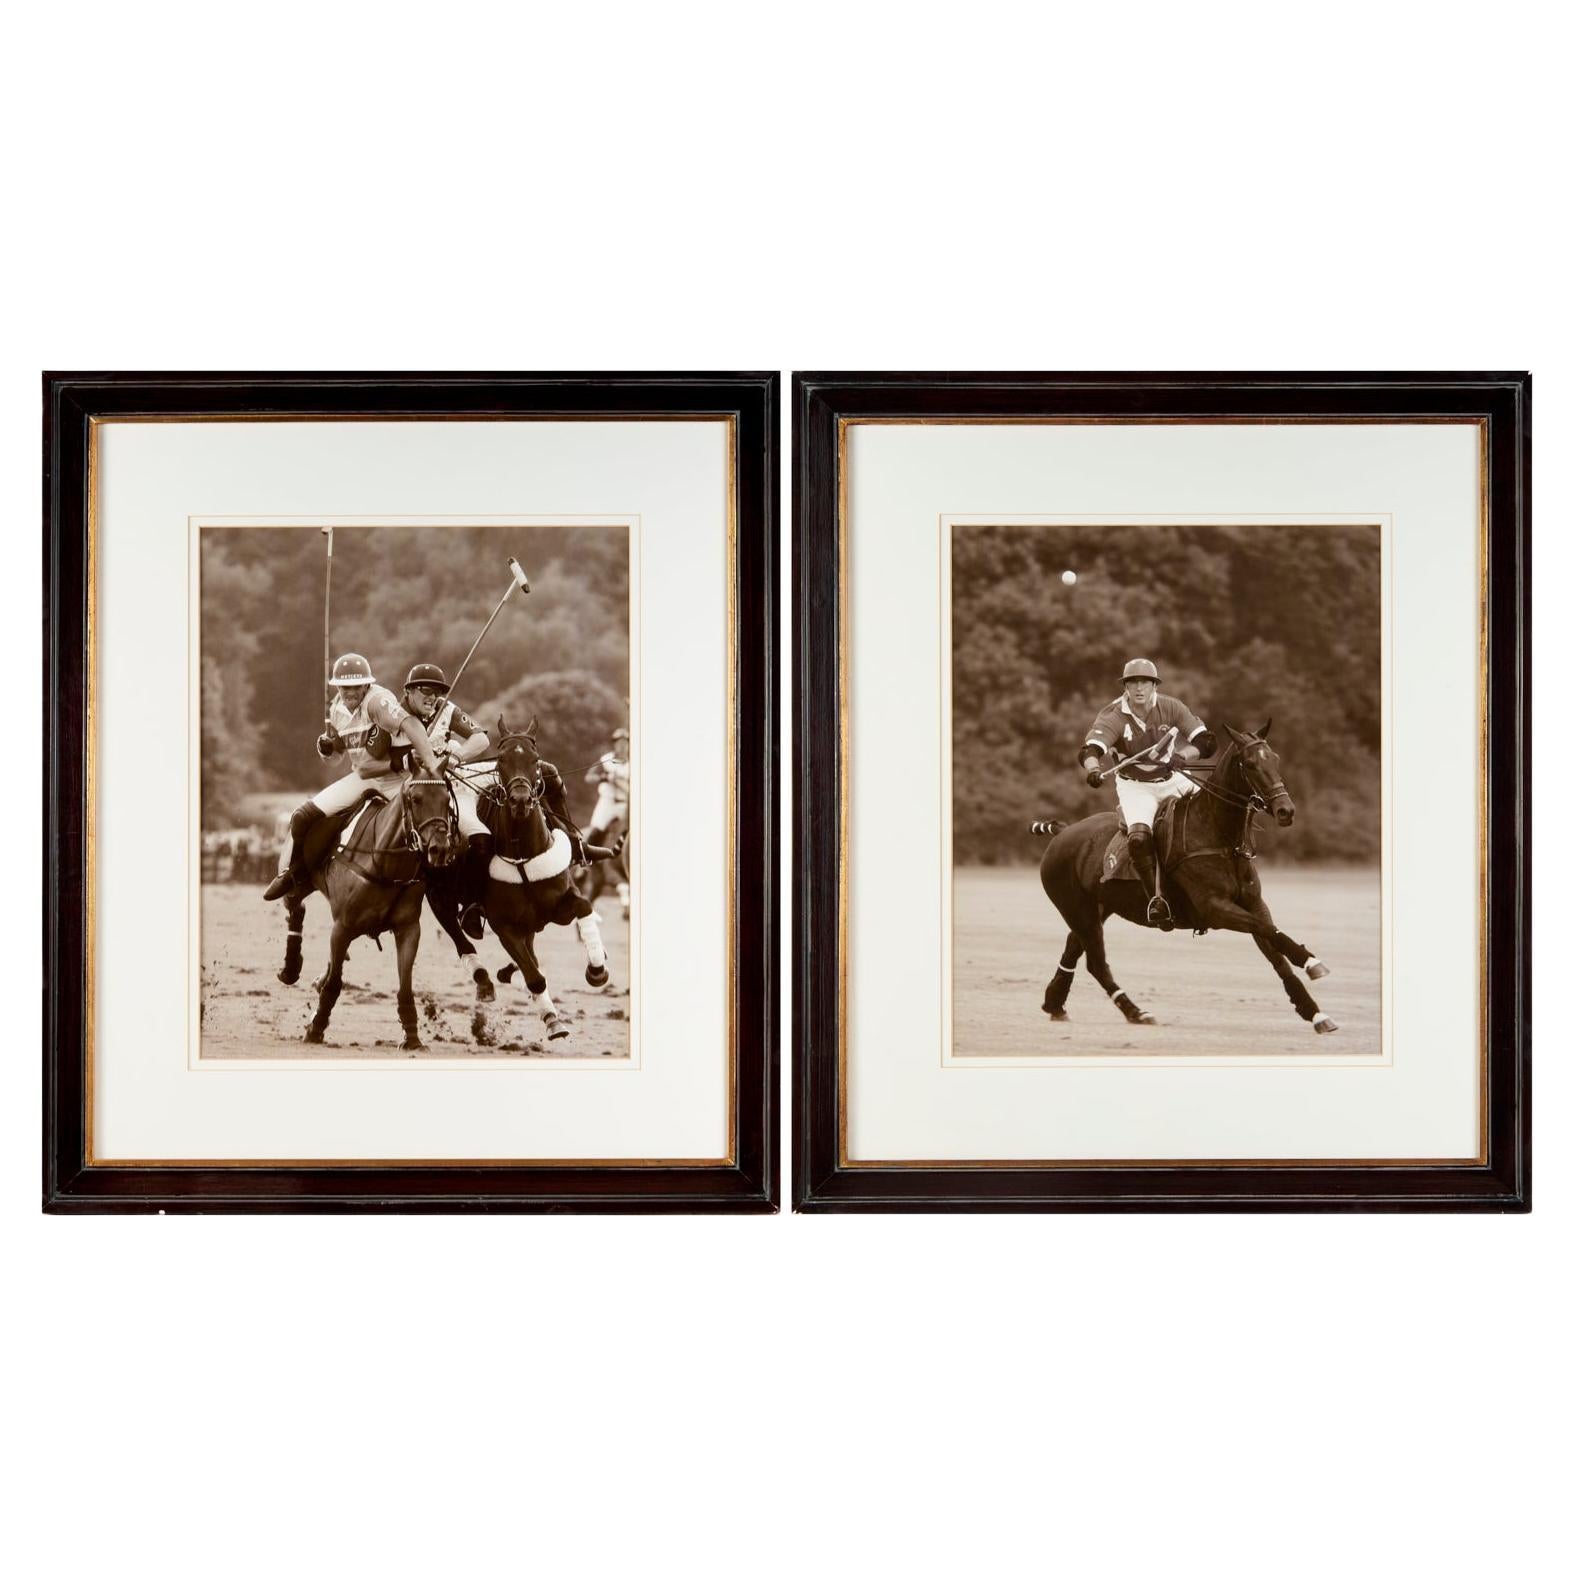 Large Framed Black and White Action Photographic Prints of World Polo League For Sale